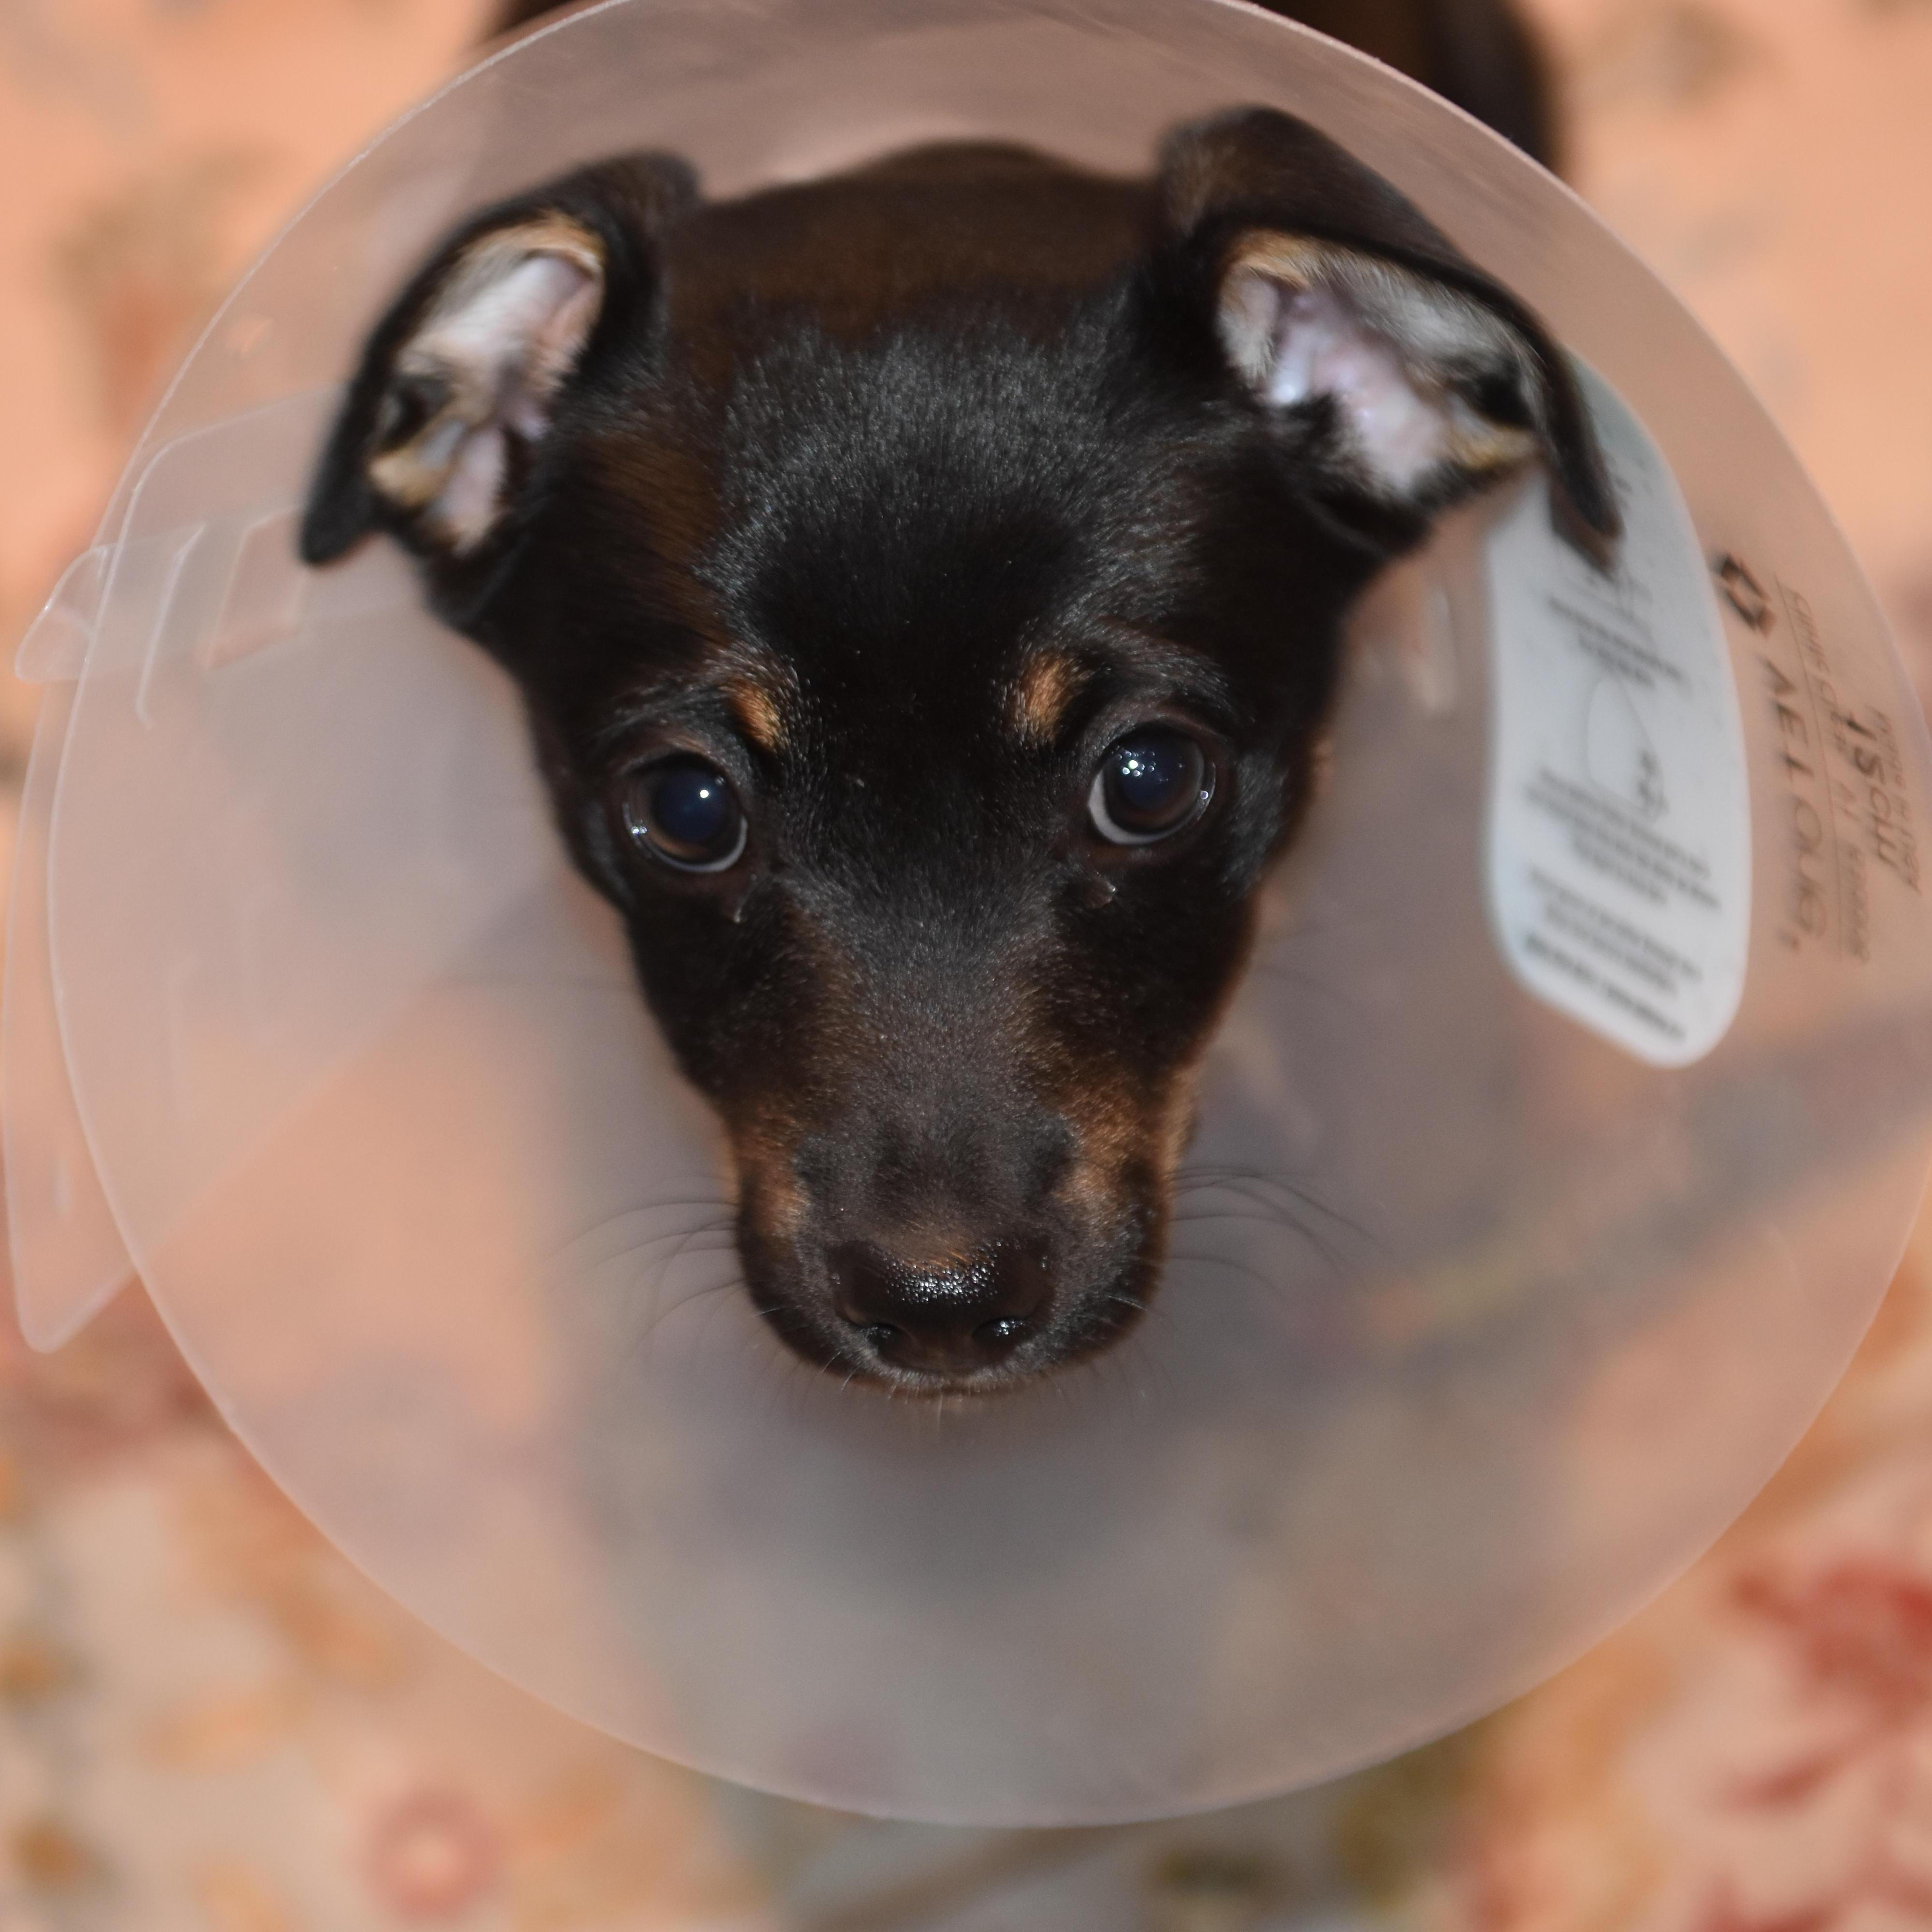 Ten weeks later, during inauguration weekend, Lili escaped D.C. chaos and picked up this little princess with an Elizabethan collar.